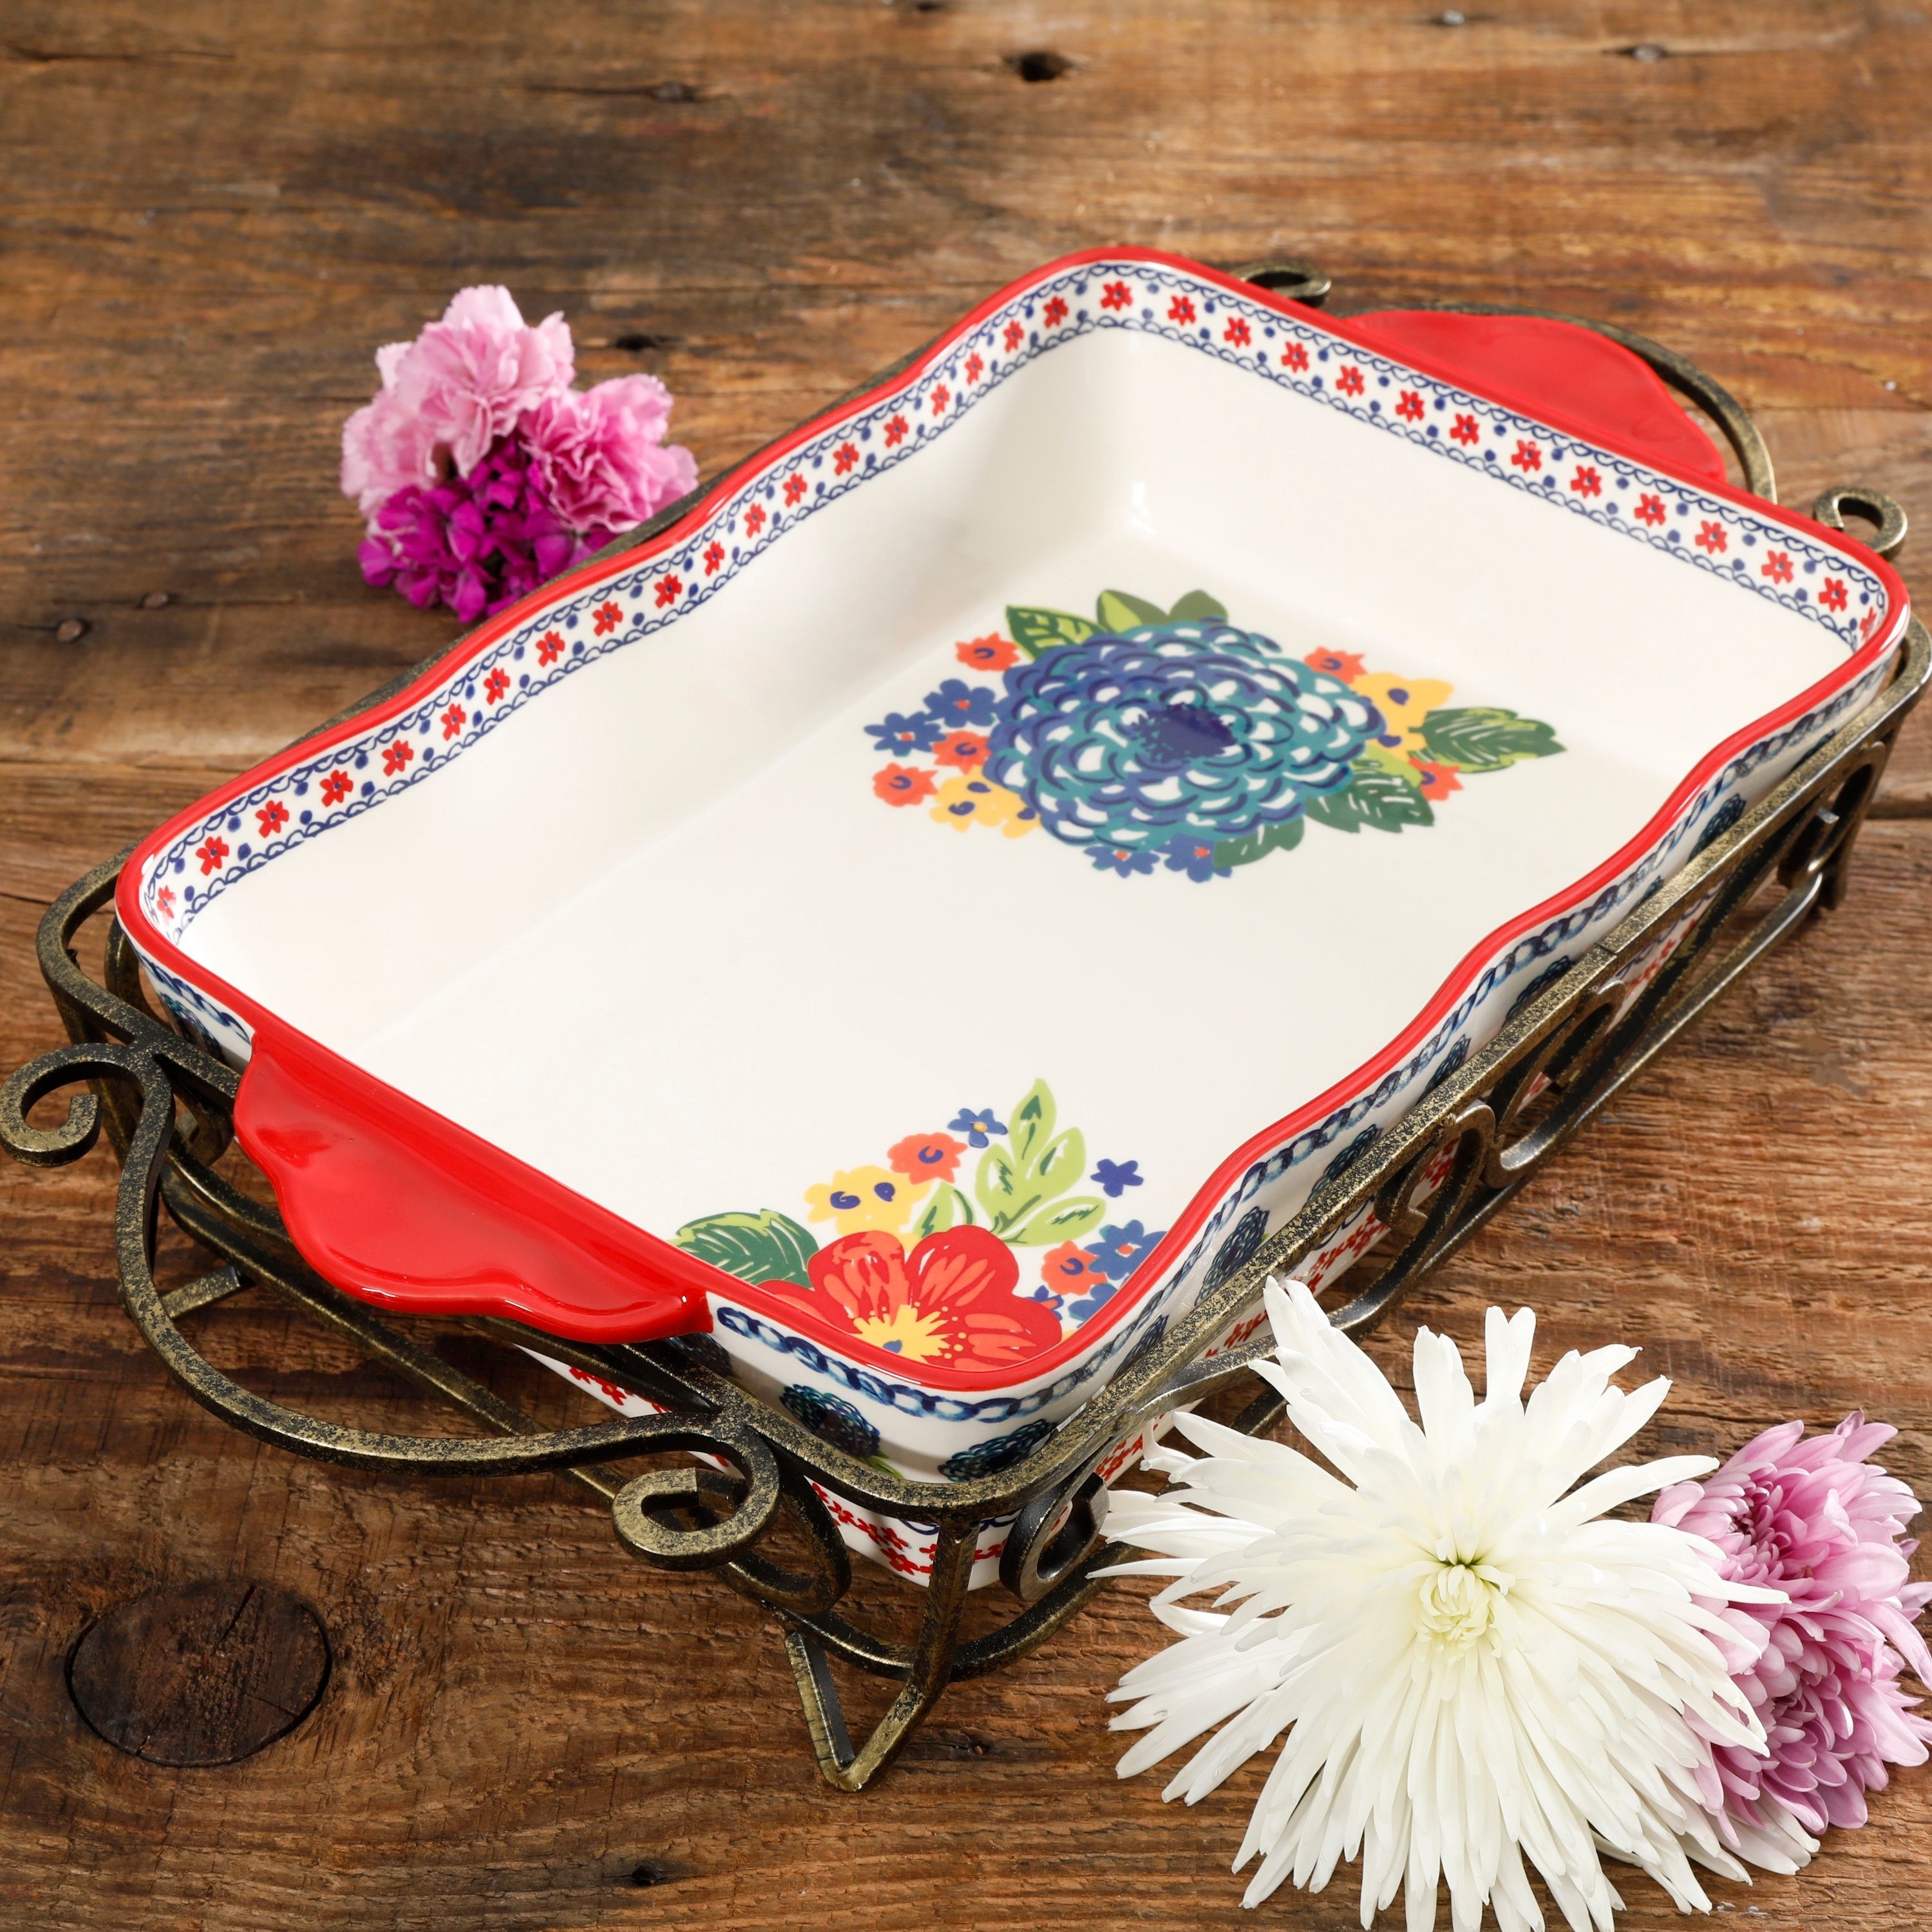 The  two-piece floral baking dish and metal rack